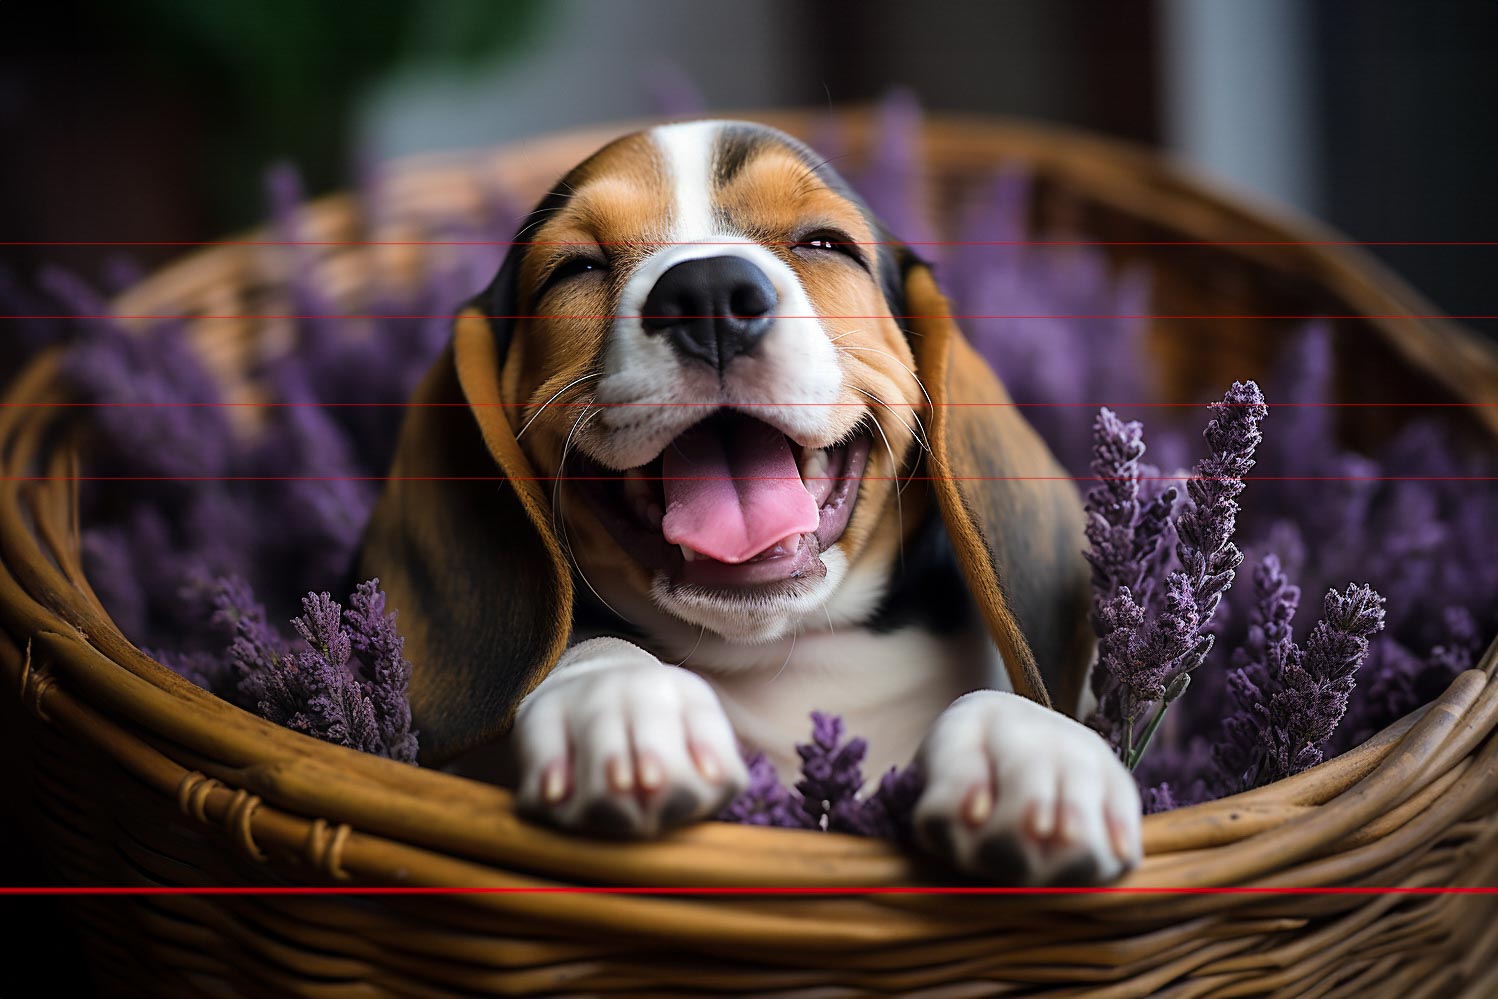 Beagle art prints on paper & canvas at k9 Gallery of Art. Delightful, detailed & humorous high-quality photorealistic original images.  Explore our collections today!